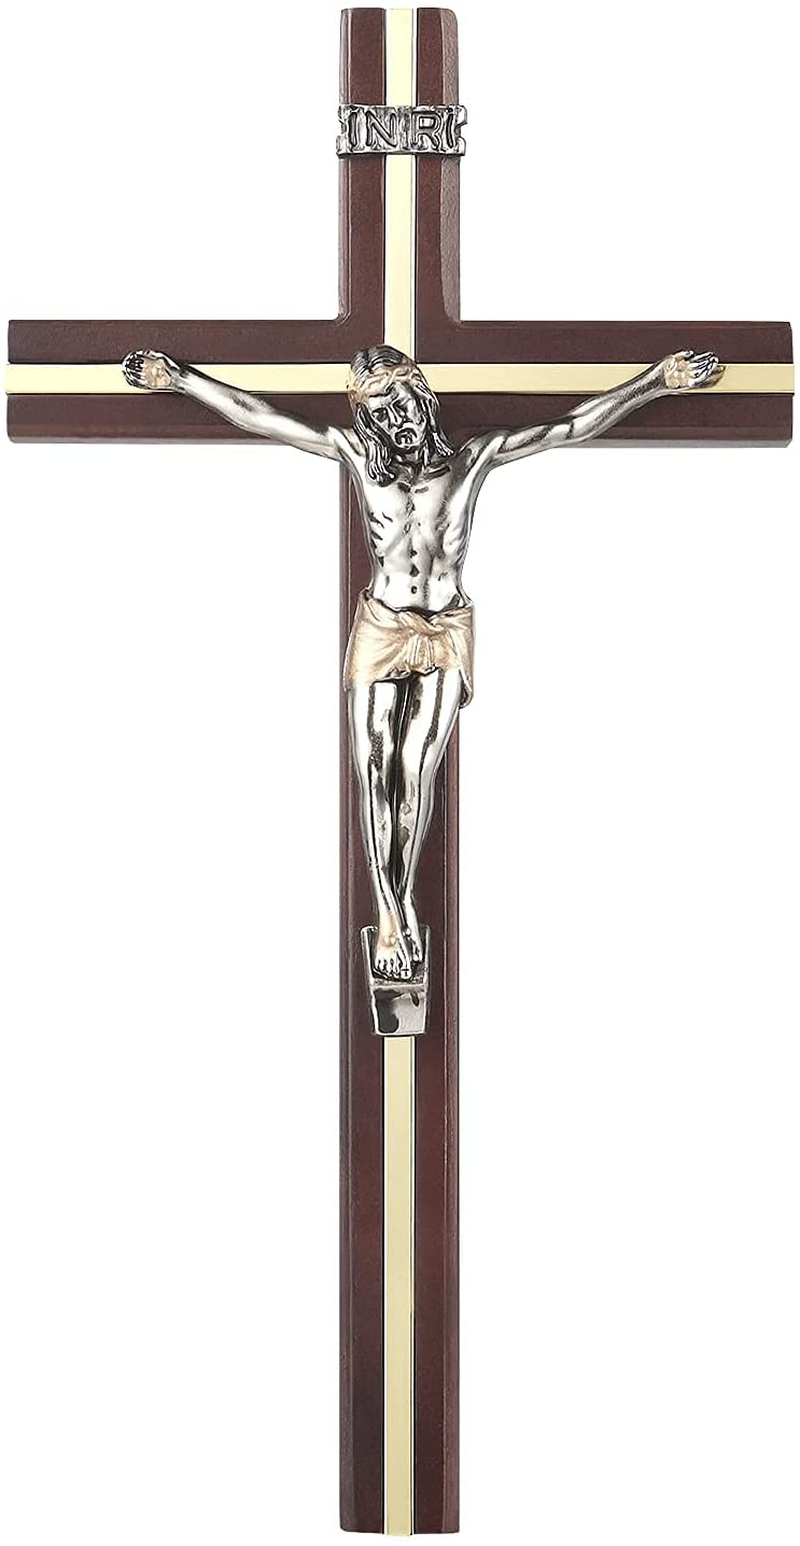 KUXBET Crucifix Wall Cross Catholic Wooden Jesus Christ Wall Hanging Cross for Home Decor , 10 Inch - Antique Gold